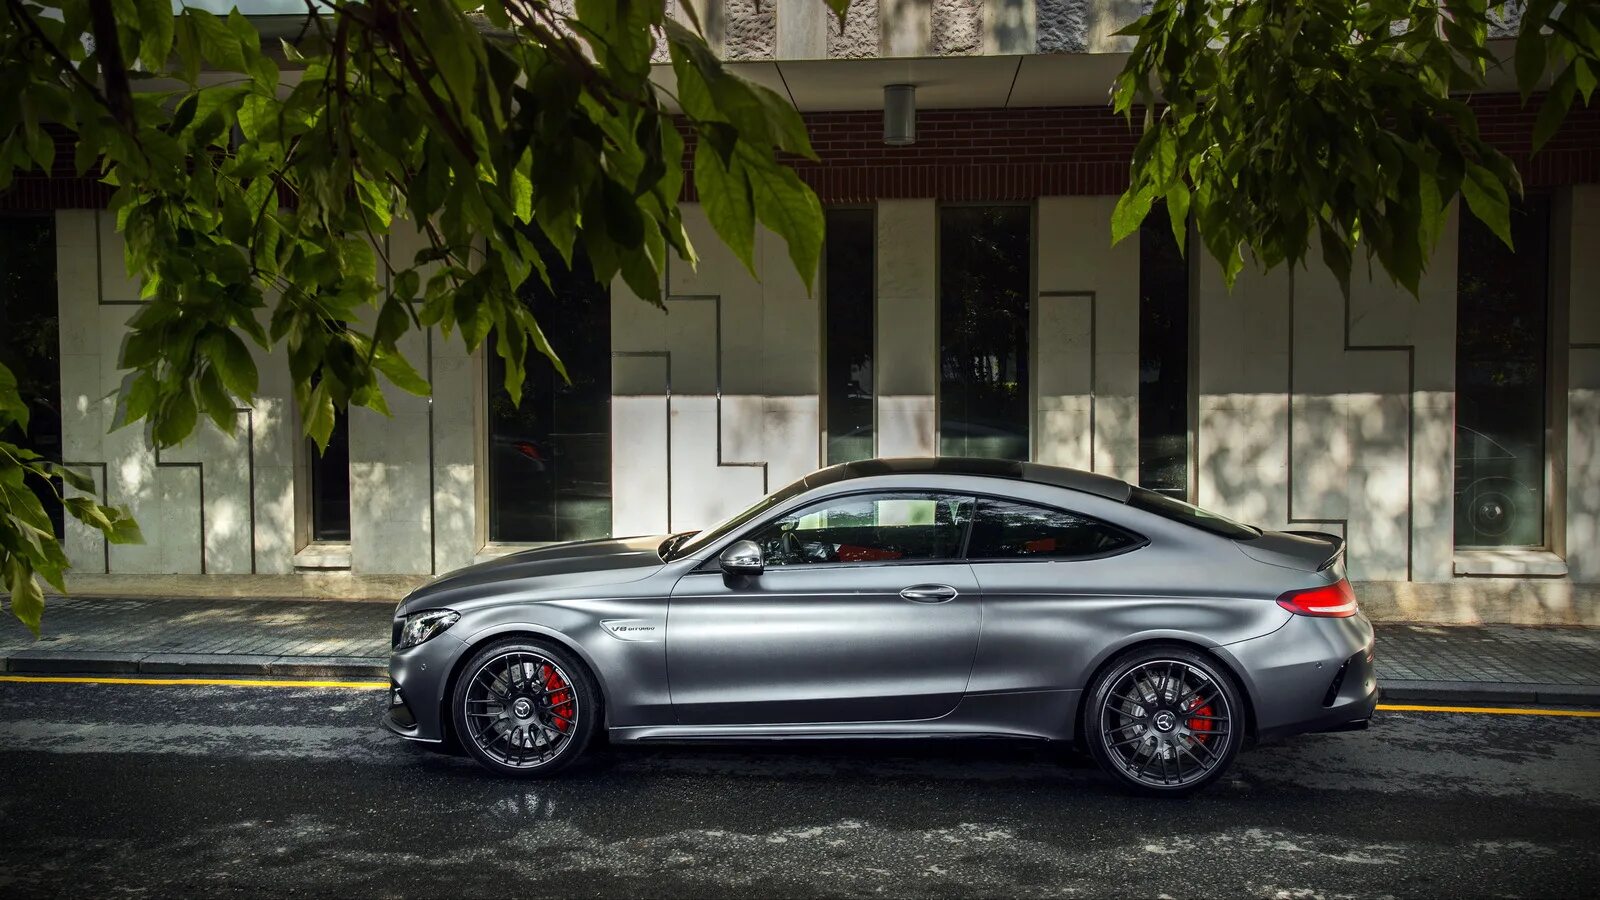 Mercedes coupe 2024. Mercedes c63 AMG Coupe. C63s AMG Coupe. Mercedes AMG c63 s Coupe 2020. C205 AMG Coupe.